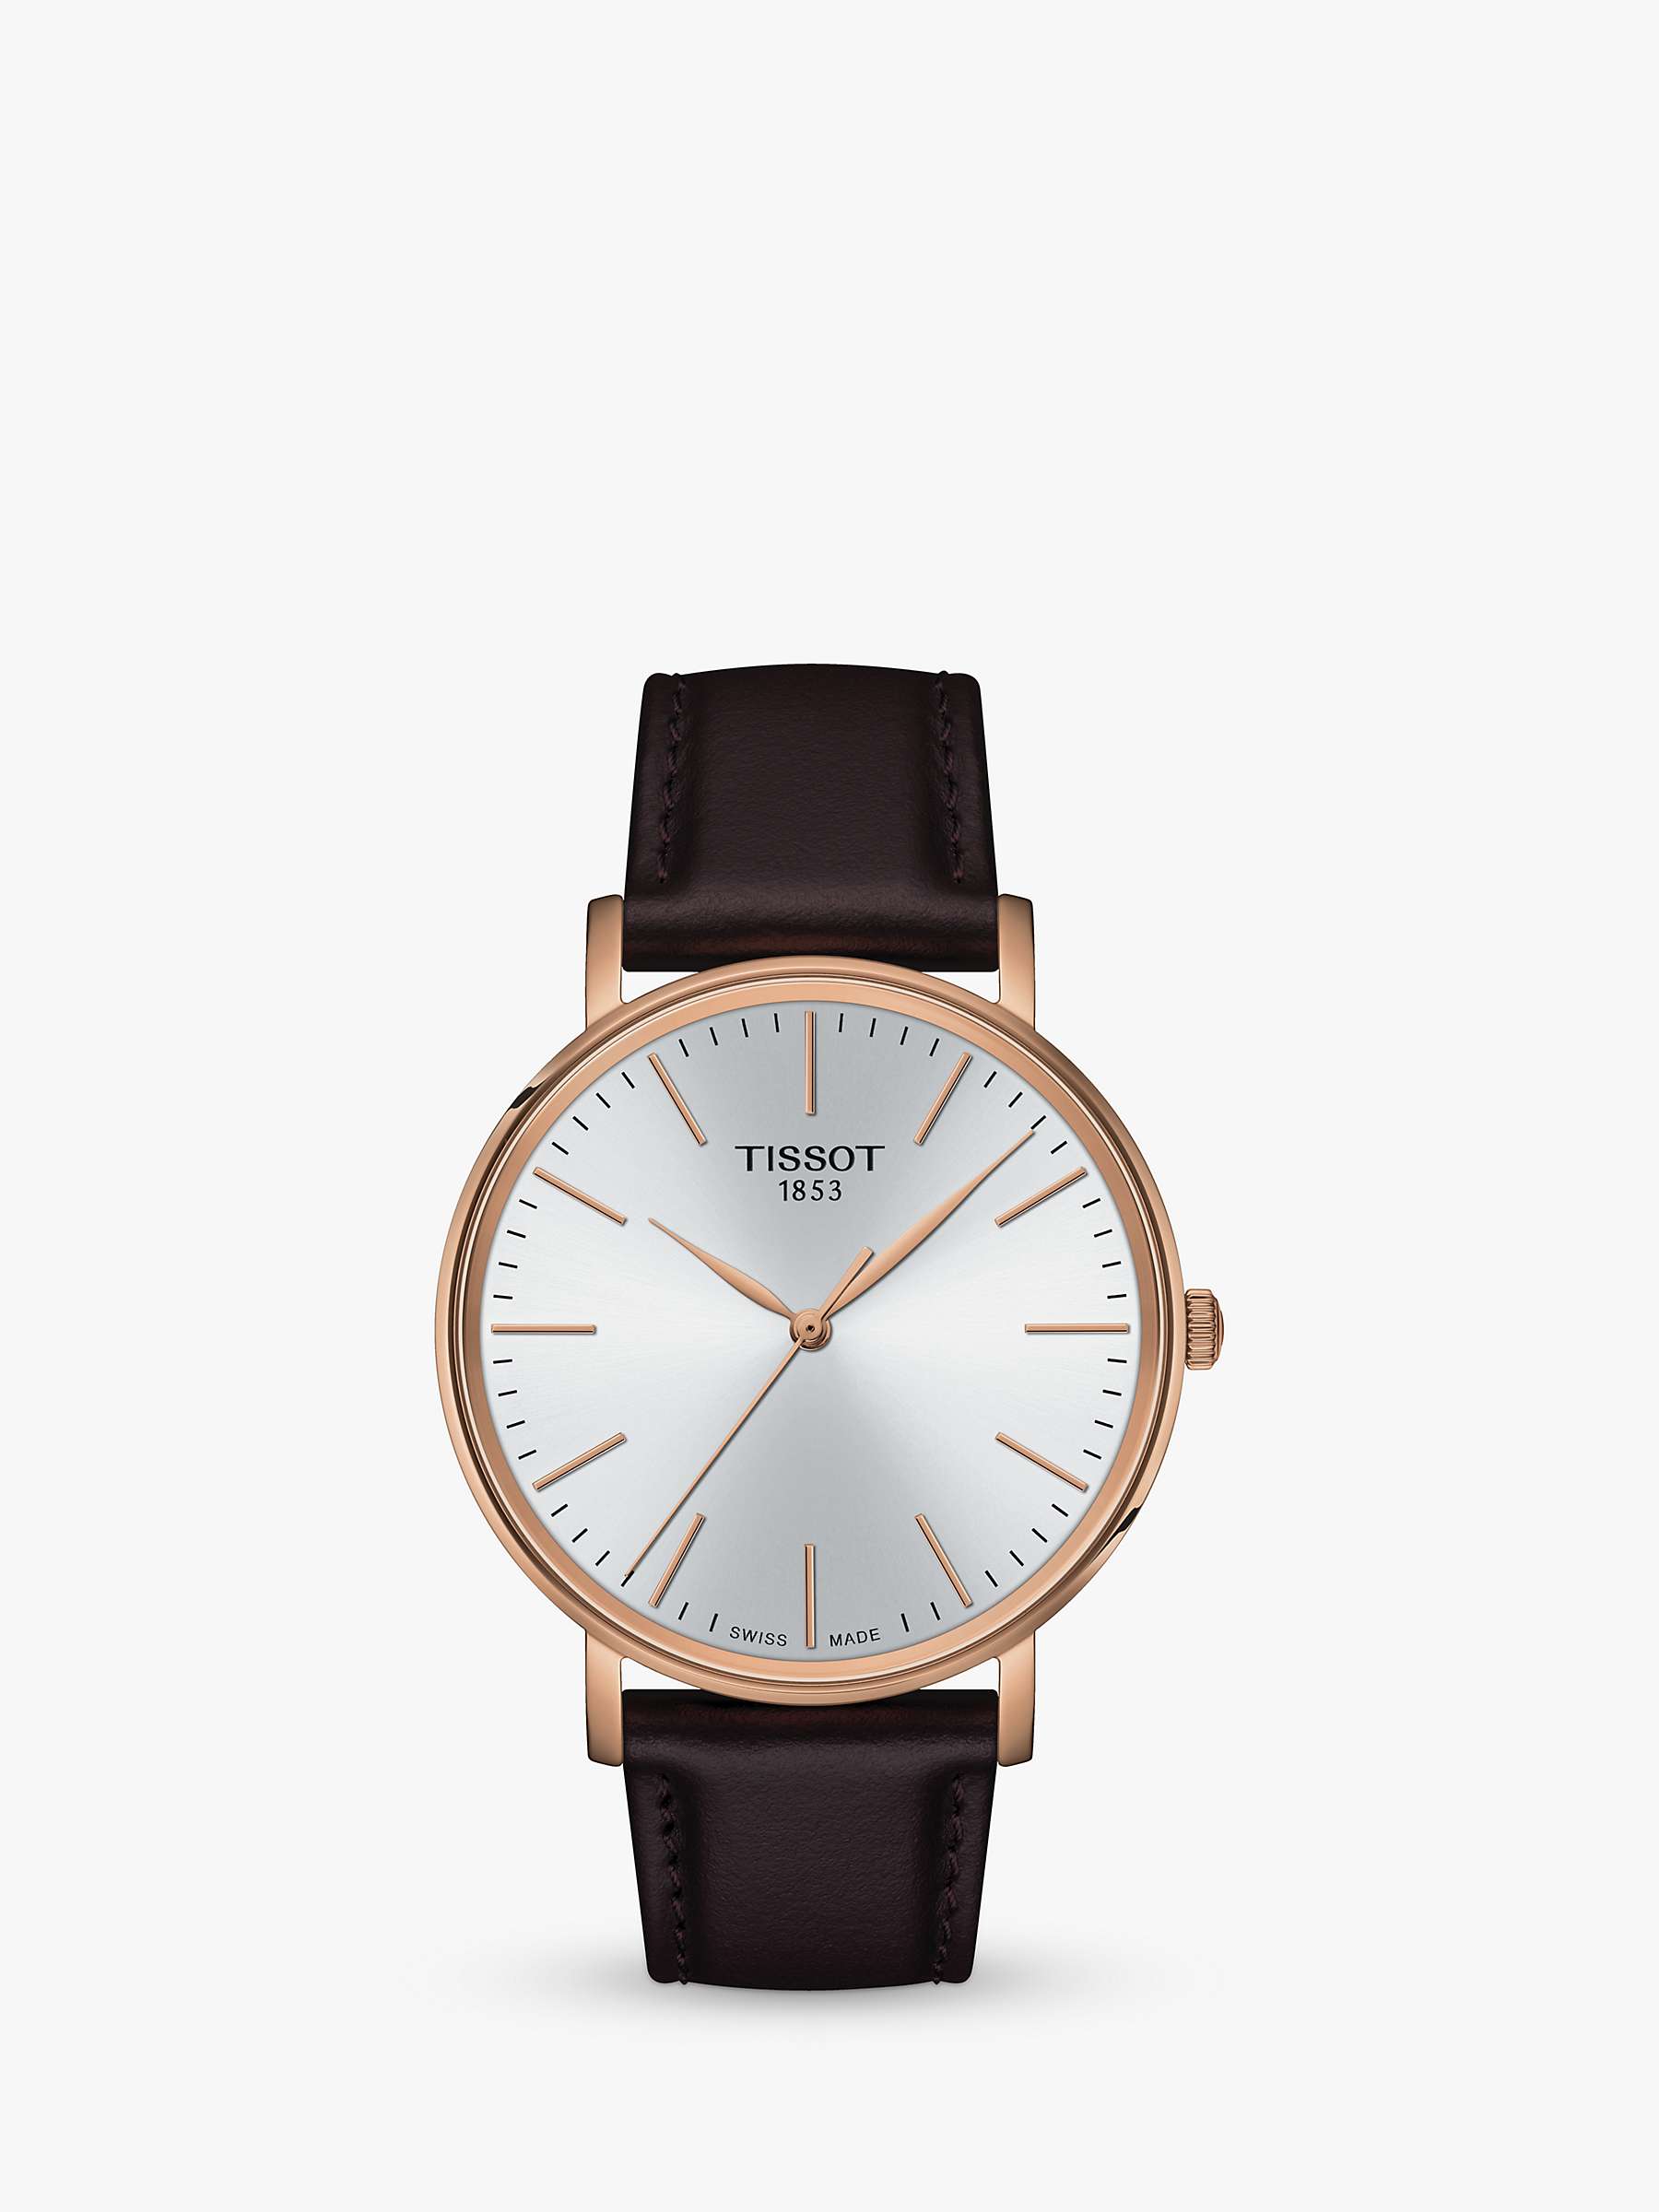 Buy Tissot Men's Everytime Leather Strap Watch Online at johnlewis.com